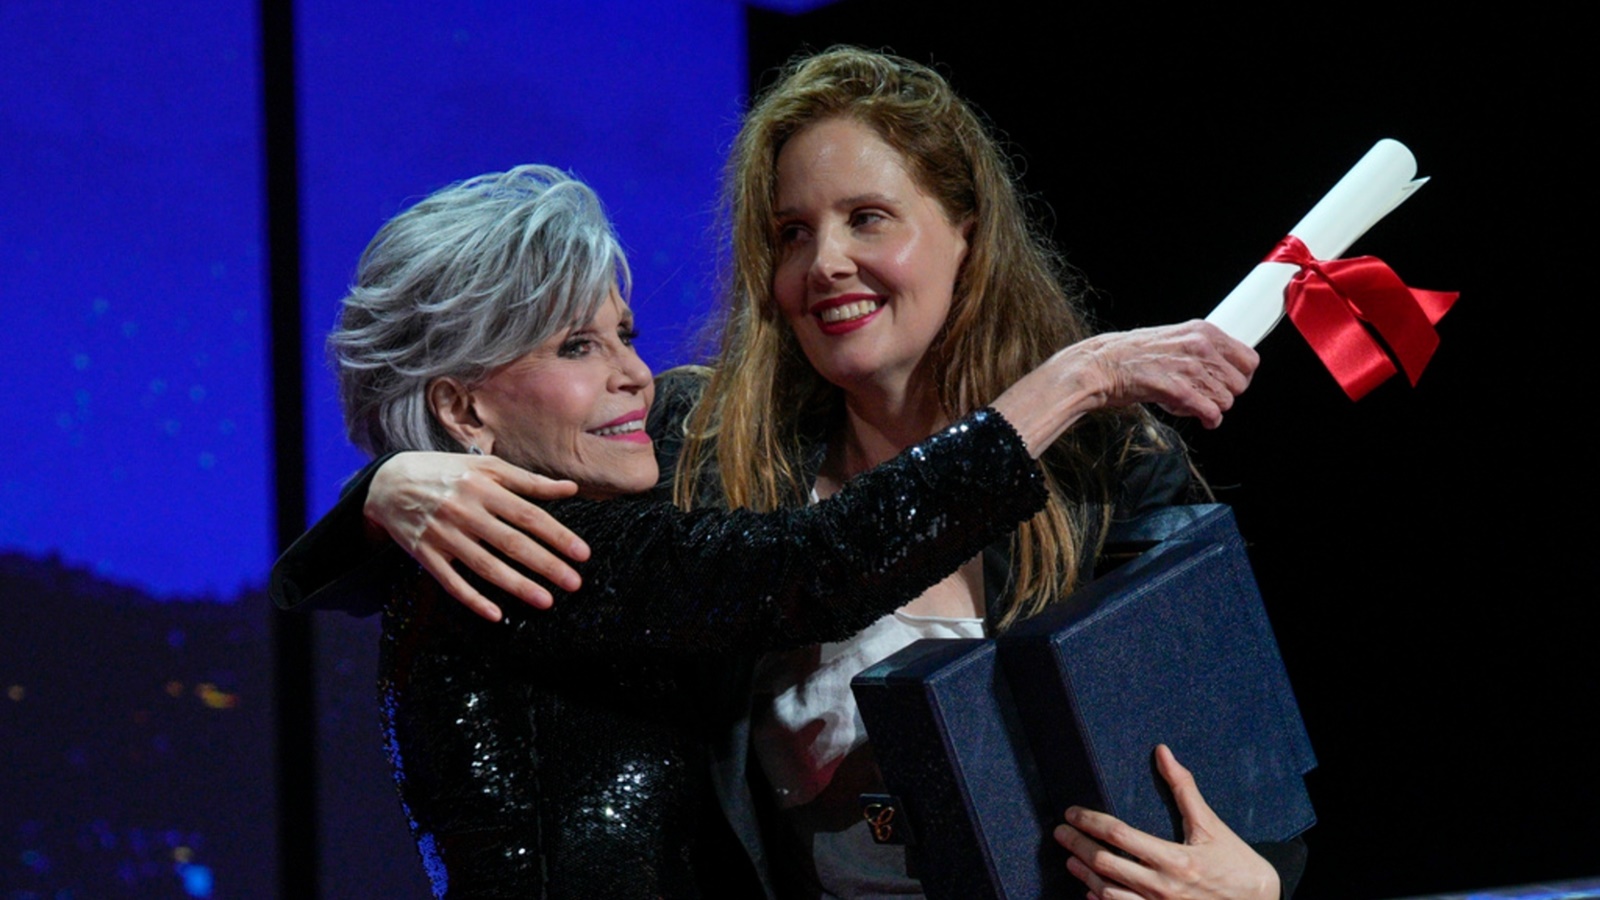 Jane Fonda throws an award to Cannes 2023 winner Justin Triet and the video goes viral